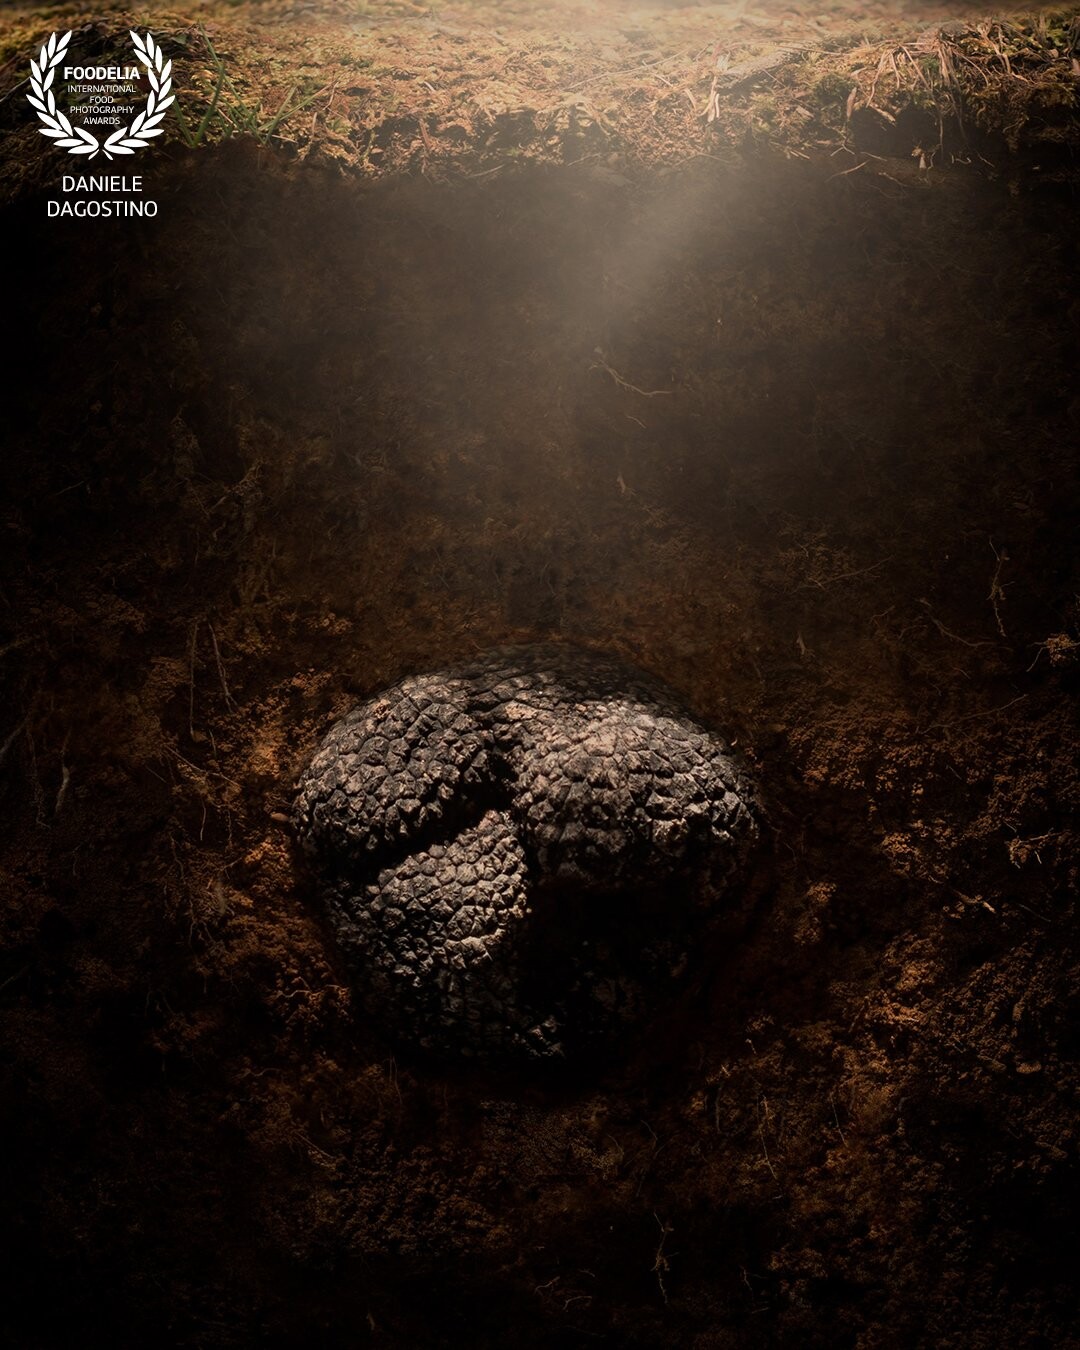 This shot was created for Urbani Tartufi, I liked to represent the truffle in its natural environment ... underground!<br />
A delicate light from above discovers the shape of this jewel of nature.<br />
Photographed with Nikon D810 and SB900 flash.